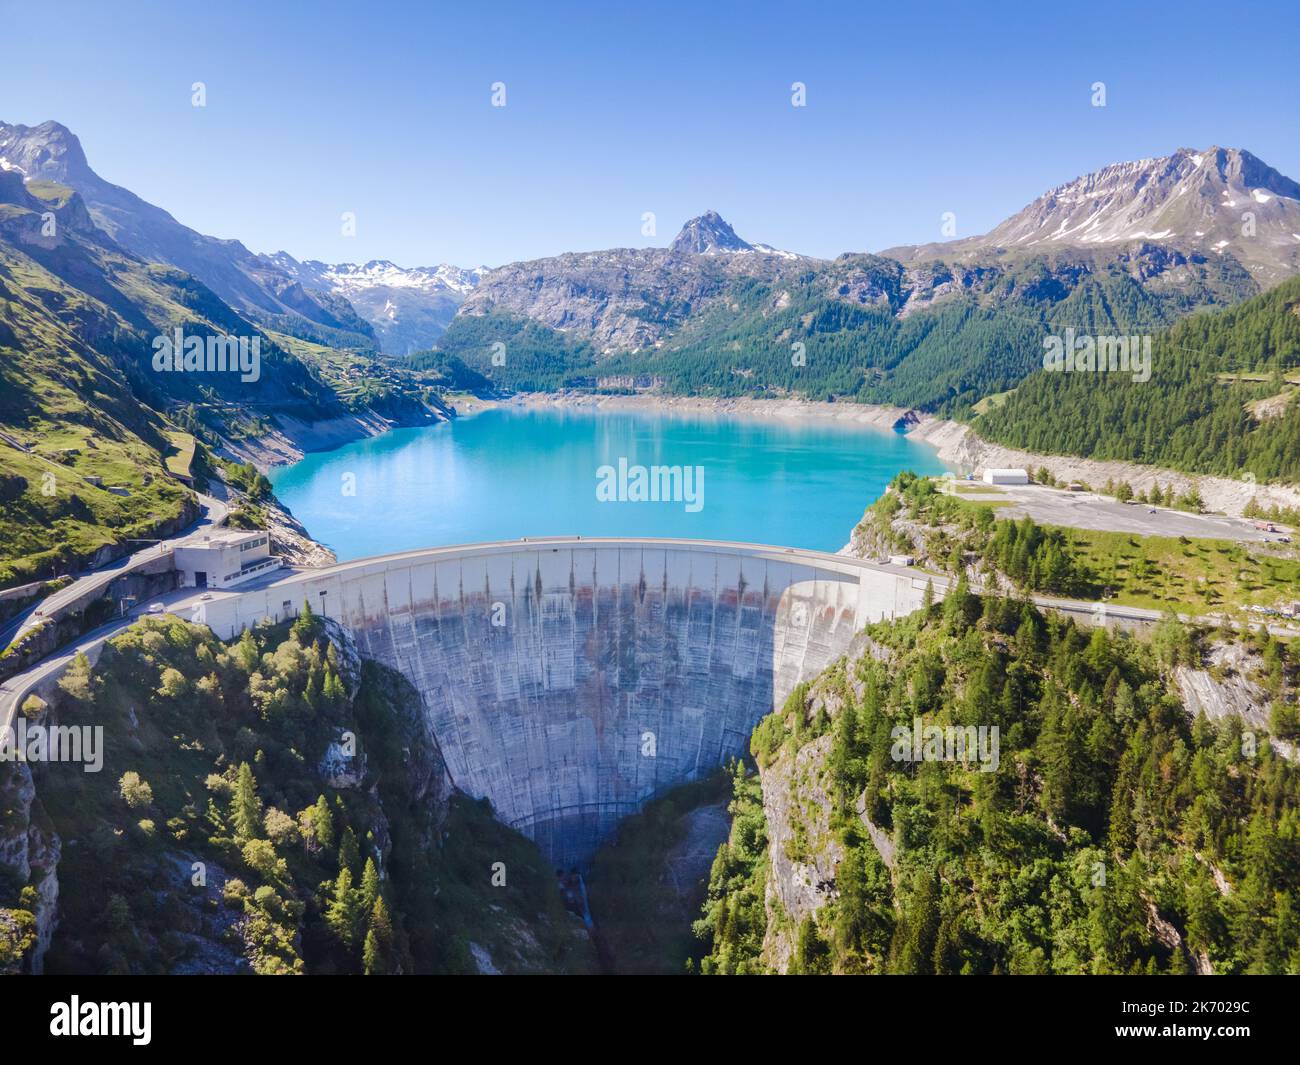 Water dam and reservoir lake aerial view in Alps mountains in summer generating hydroelectricity. Low CO2 footprint, decarbonize, renewable energy, su Stock Photo